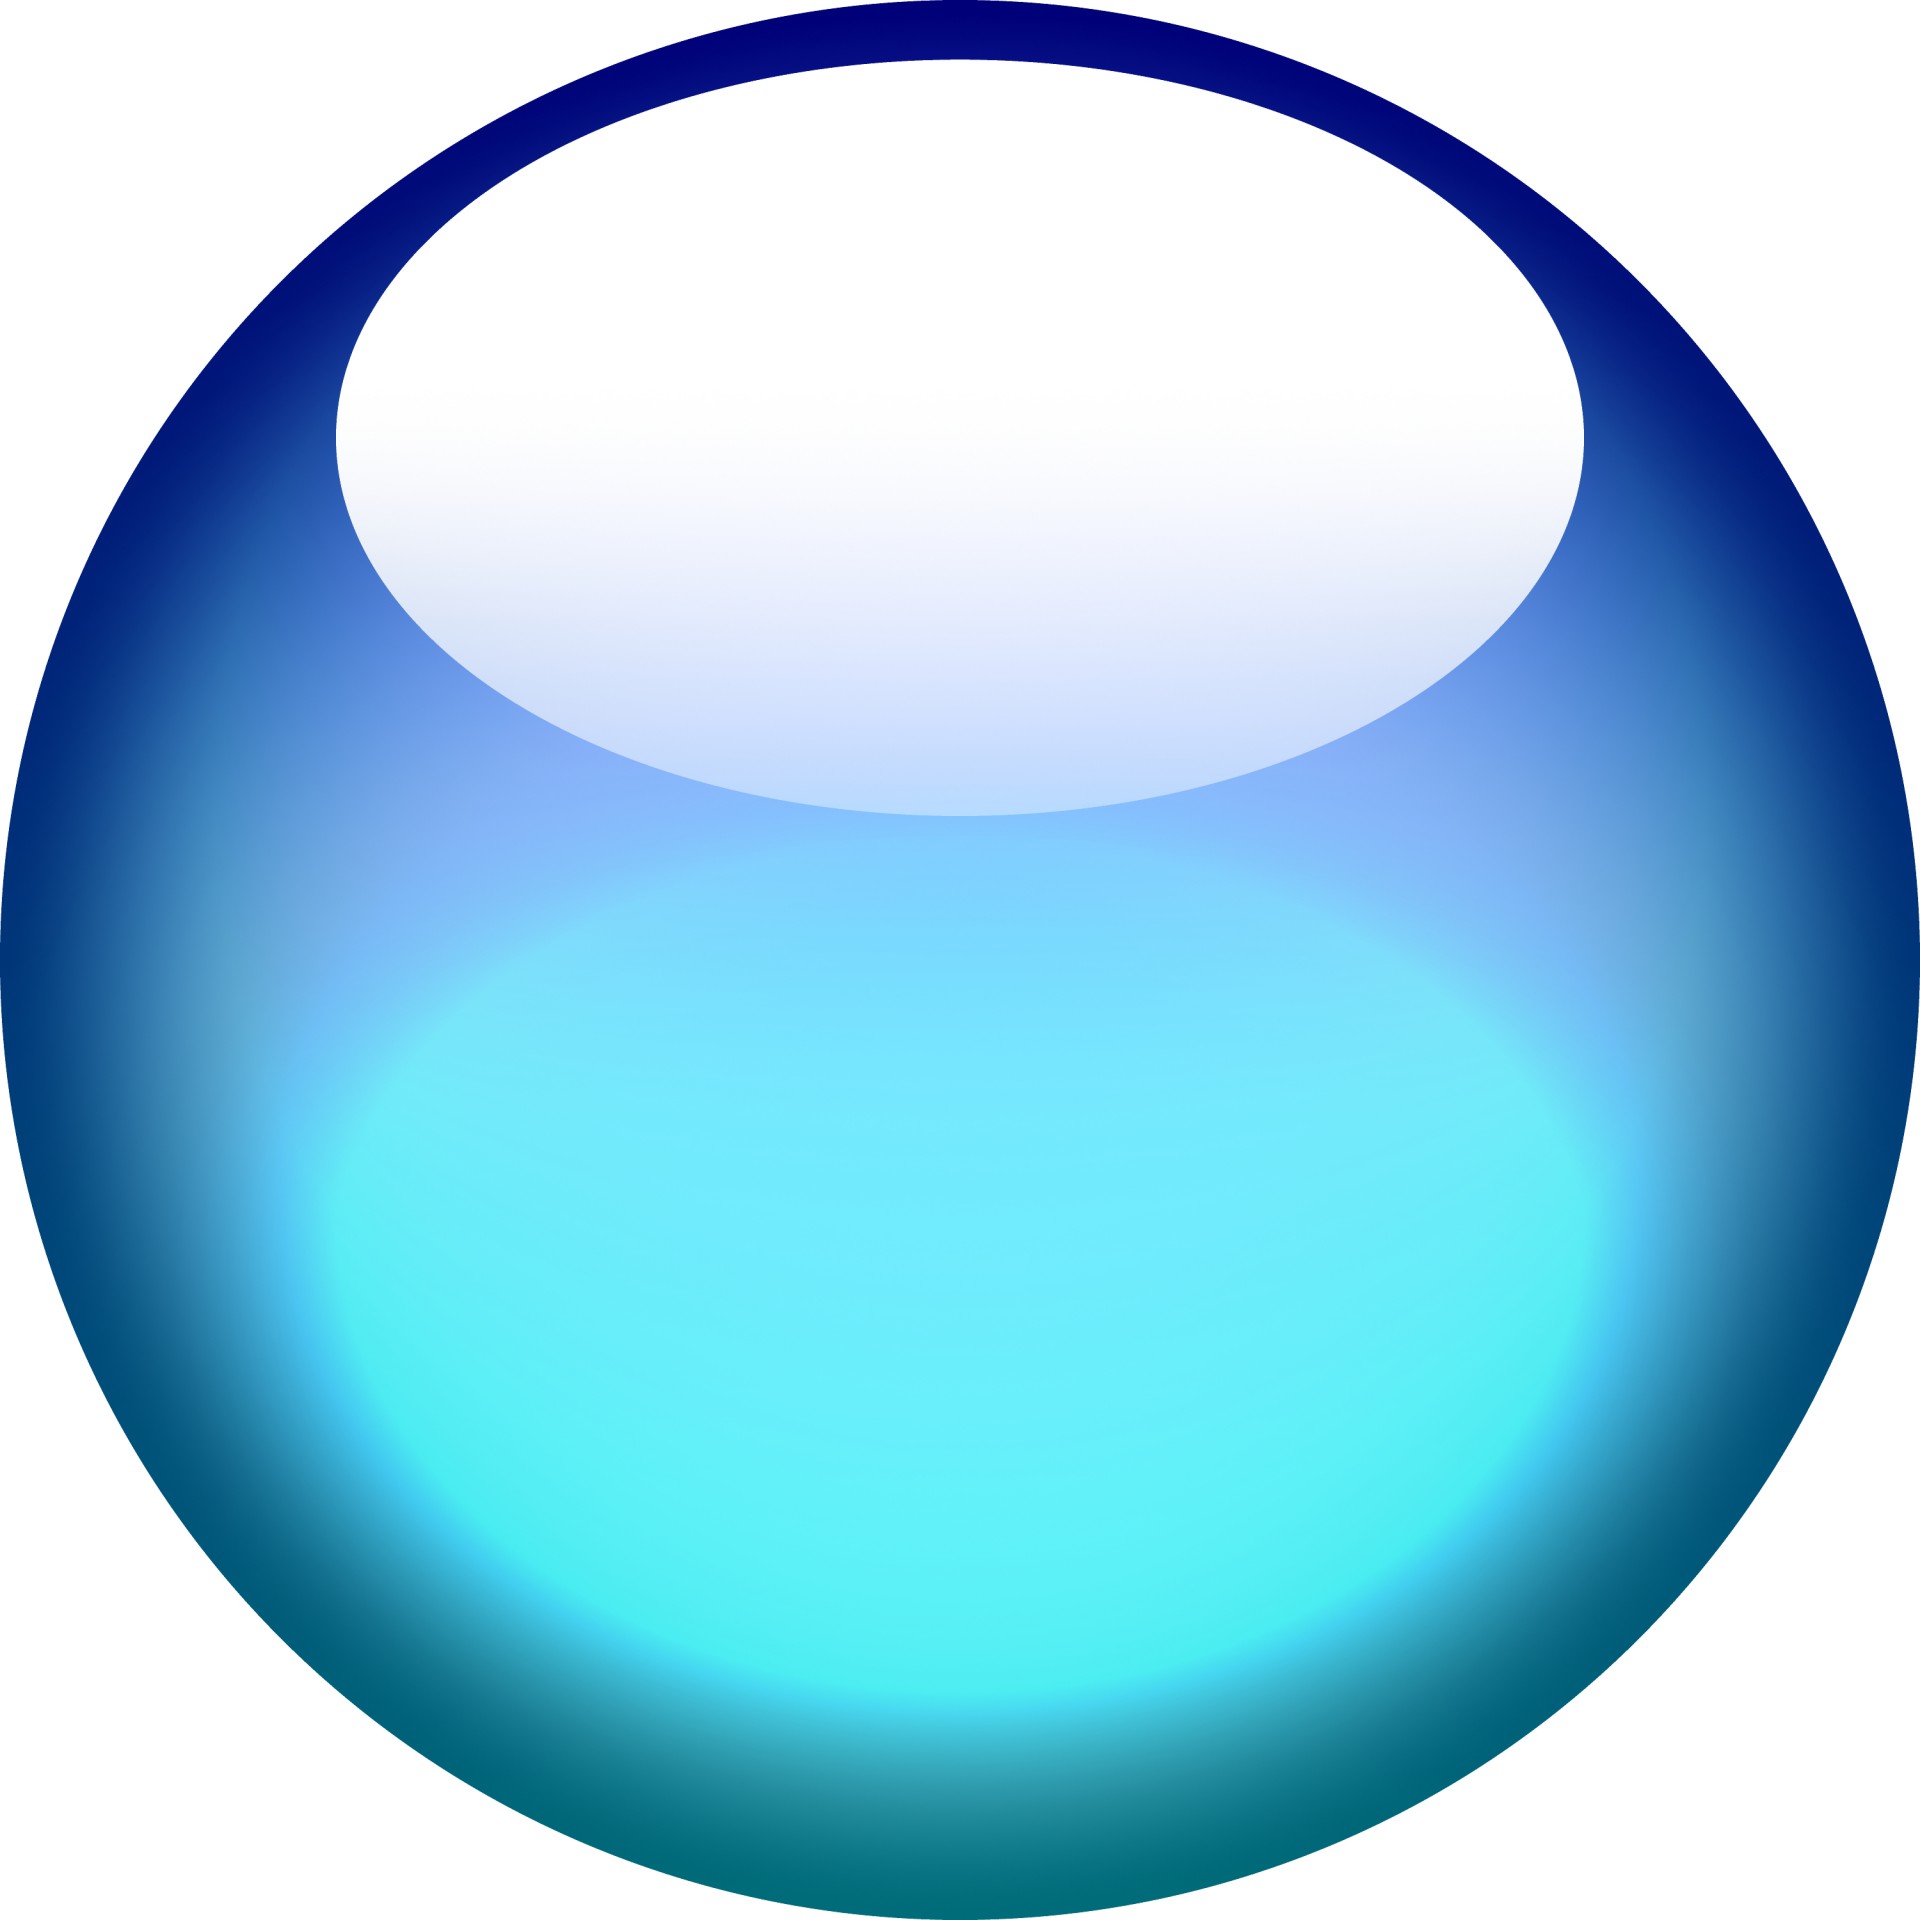 Button,circle,shape,blue,glass - free image from